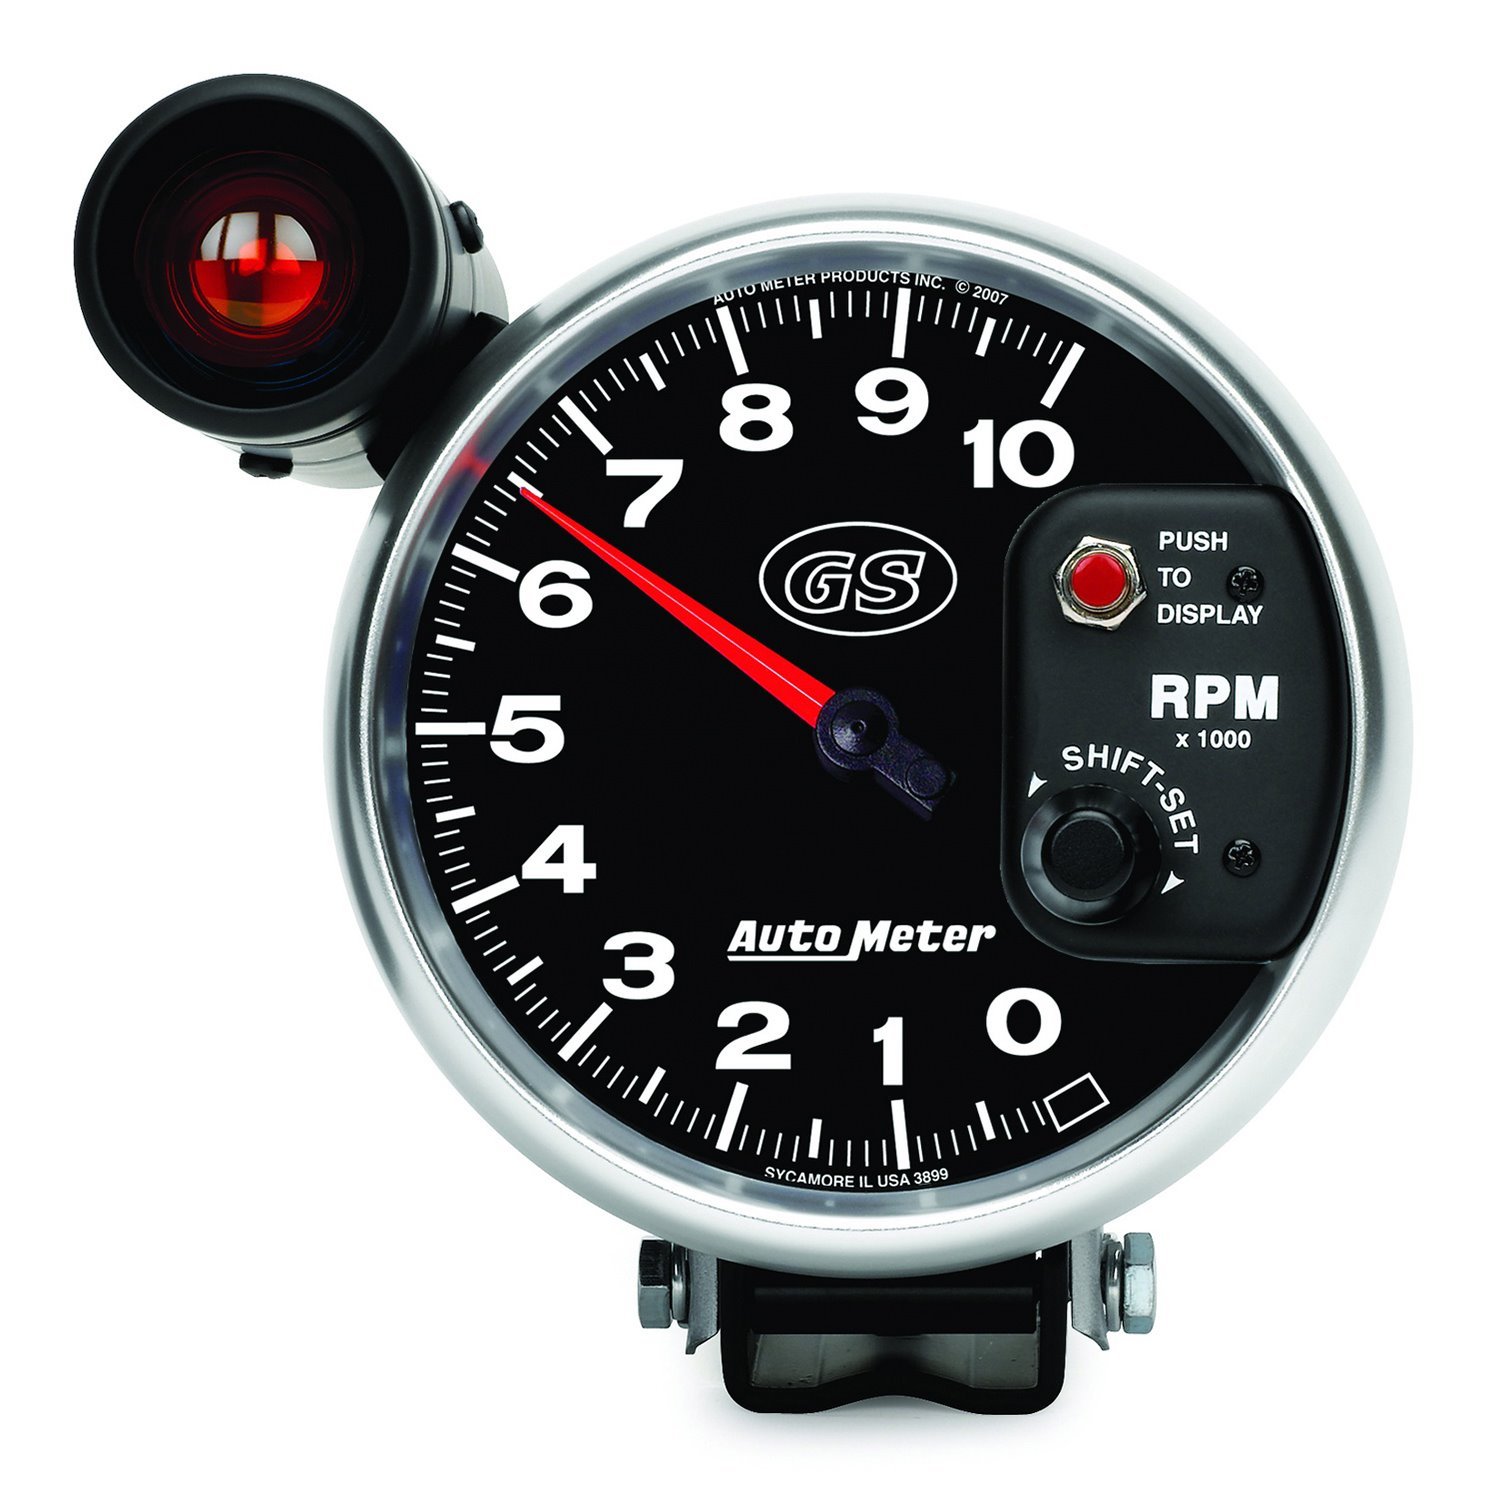 GS Series Tachometer 5", Electrical